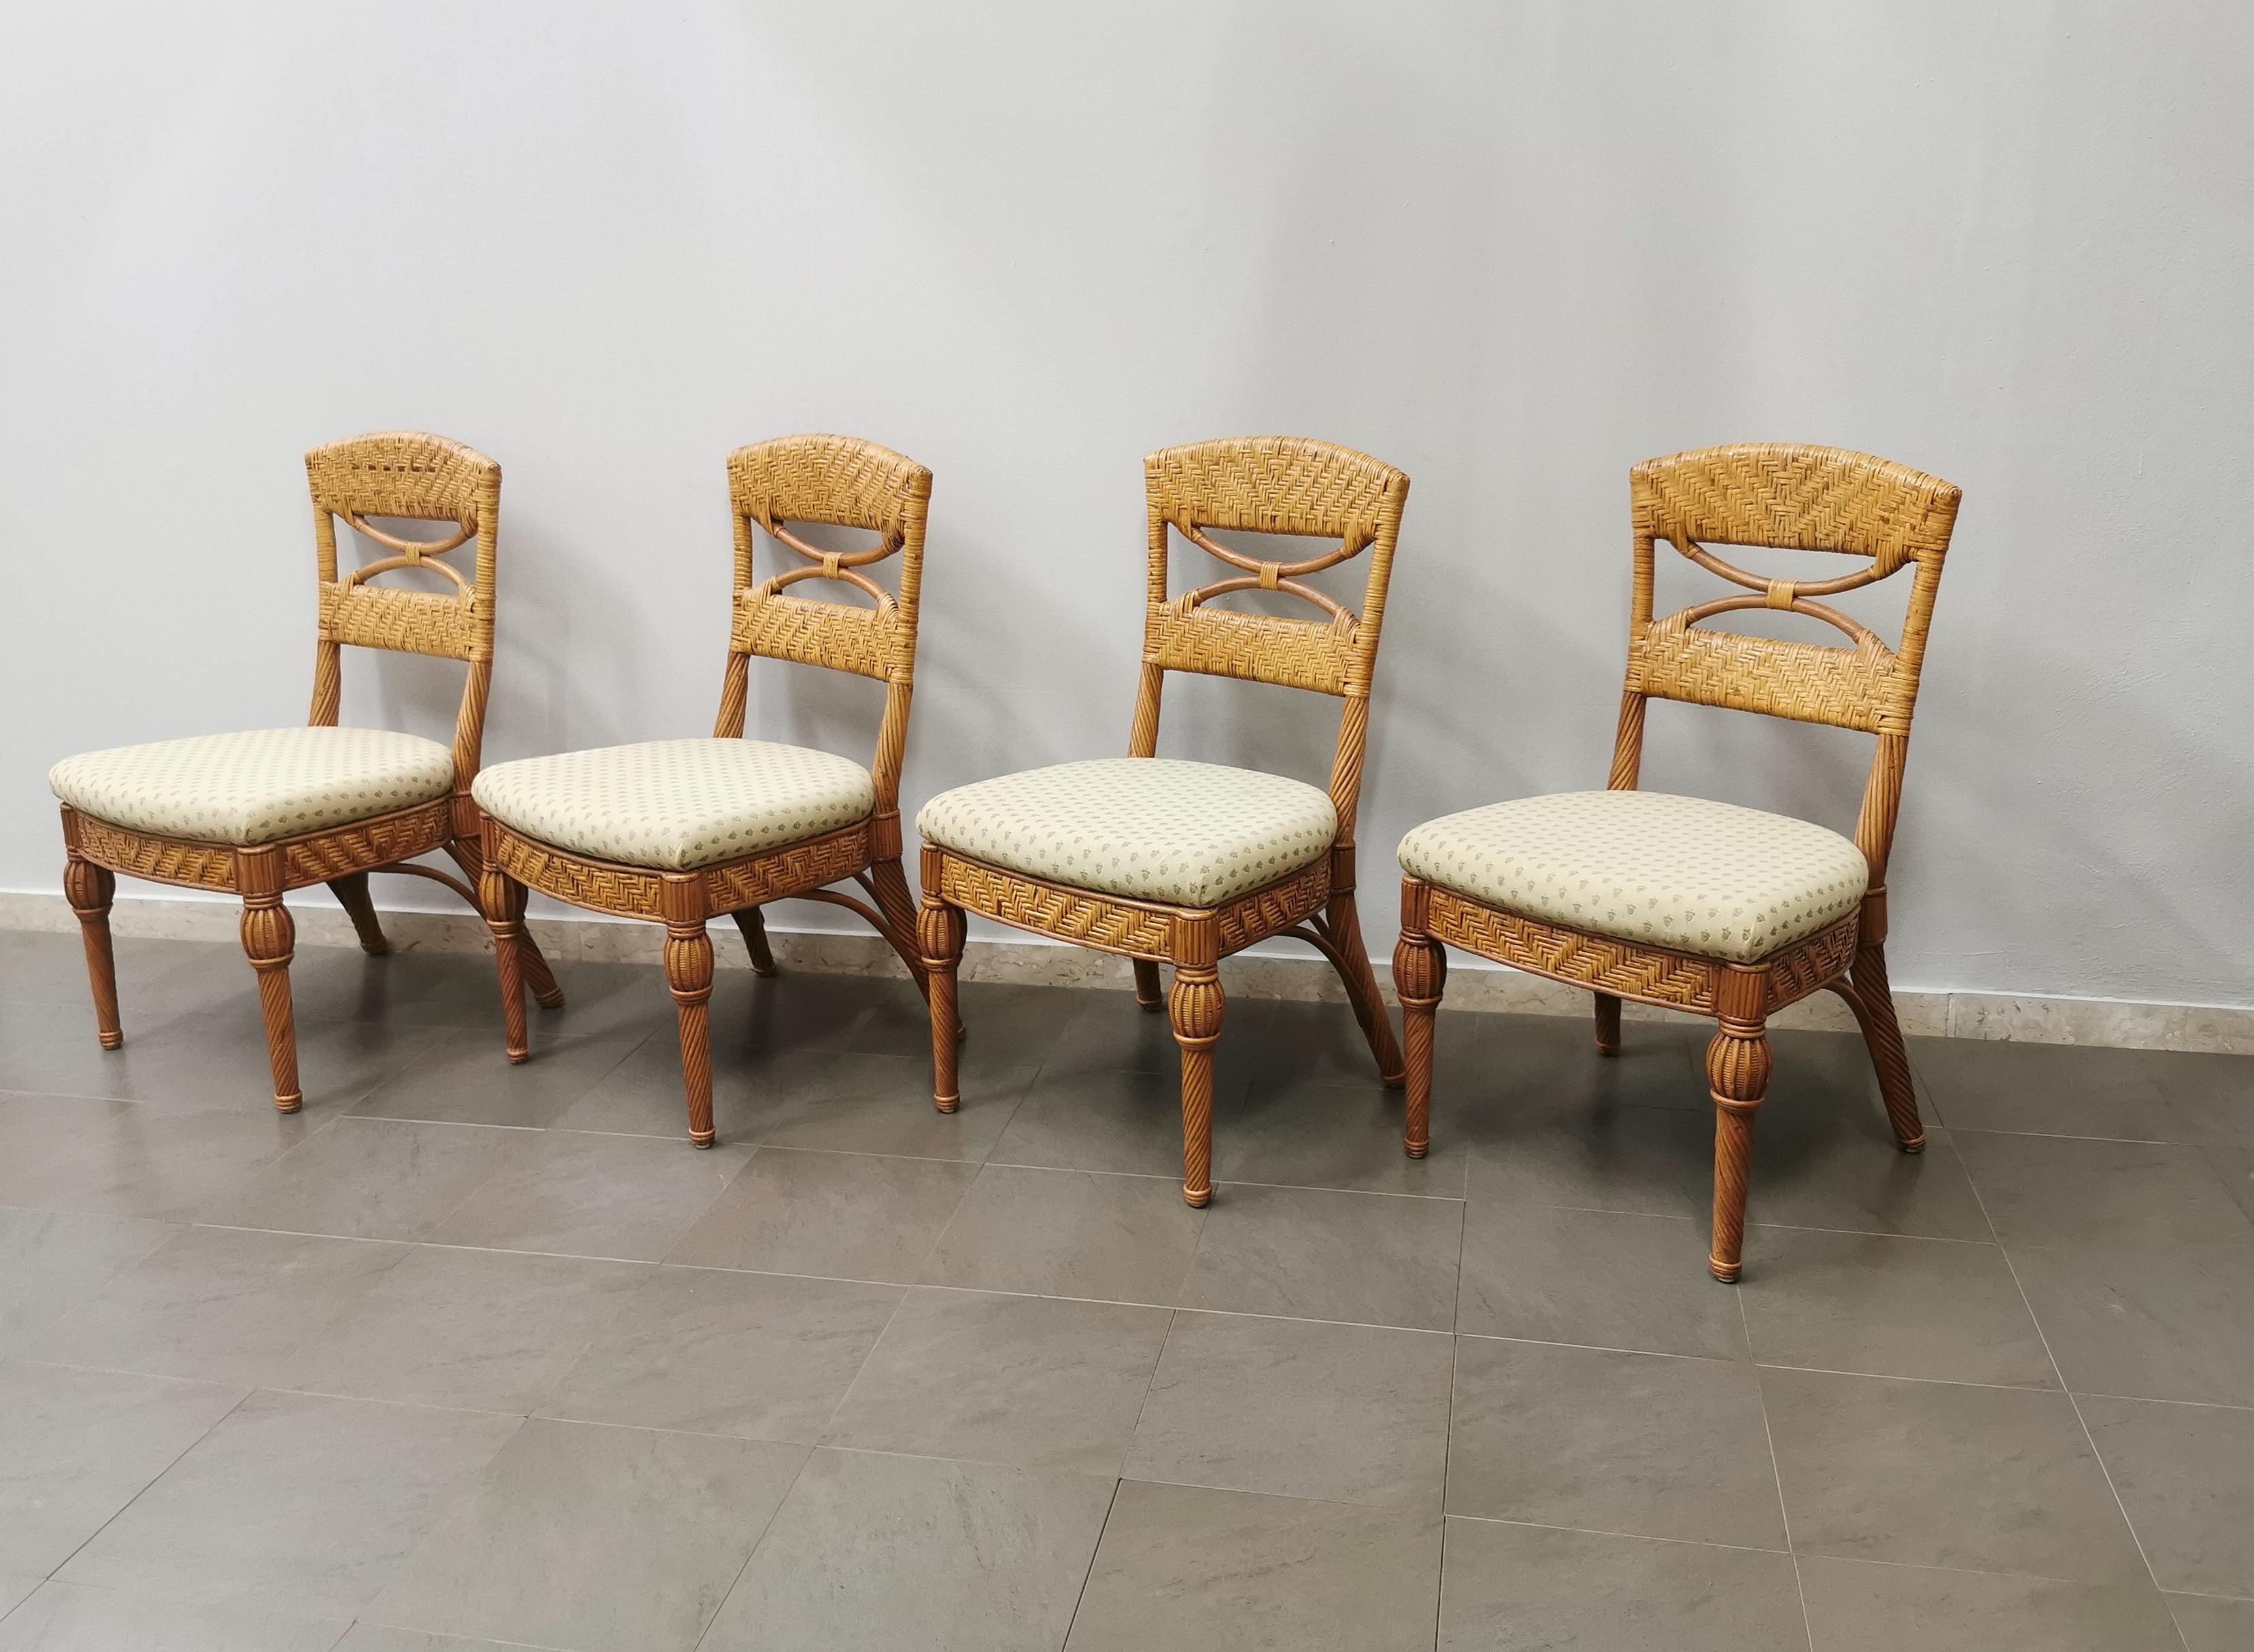 Set of 4 dining or garden chairs produced in Italy in the 1980s by the Vivai del Sud company. Each single chair is made of wicker with a padded seat and upholstered in a light patterned fabric.


Note: We try to offer our customers an excellent